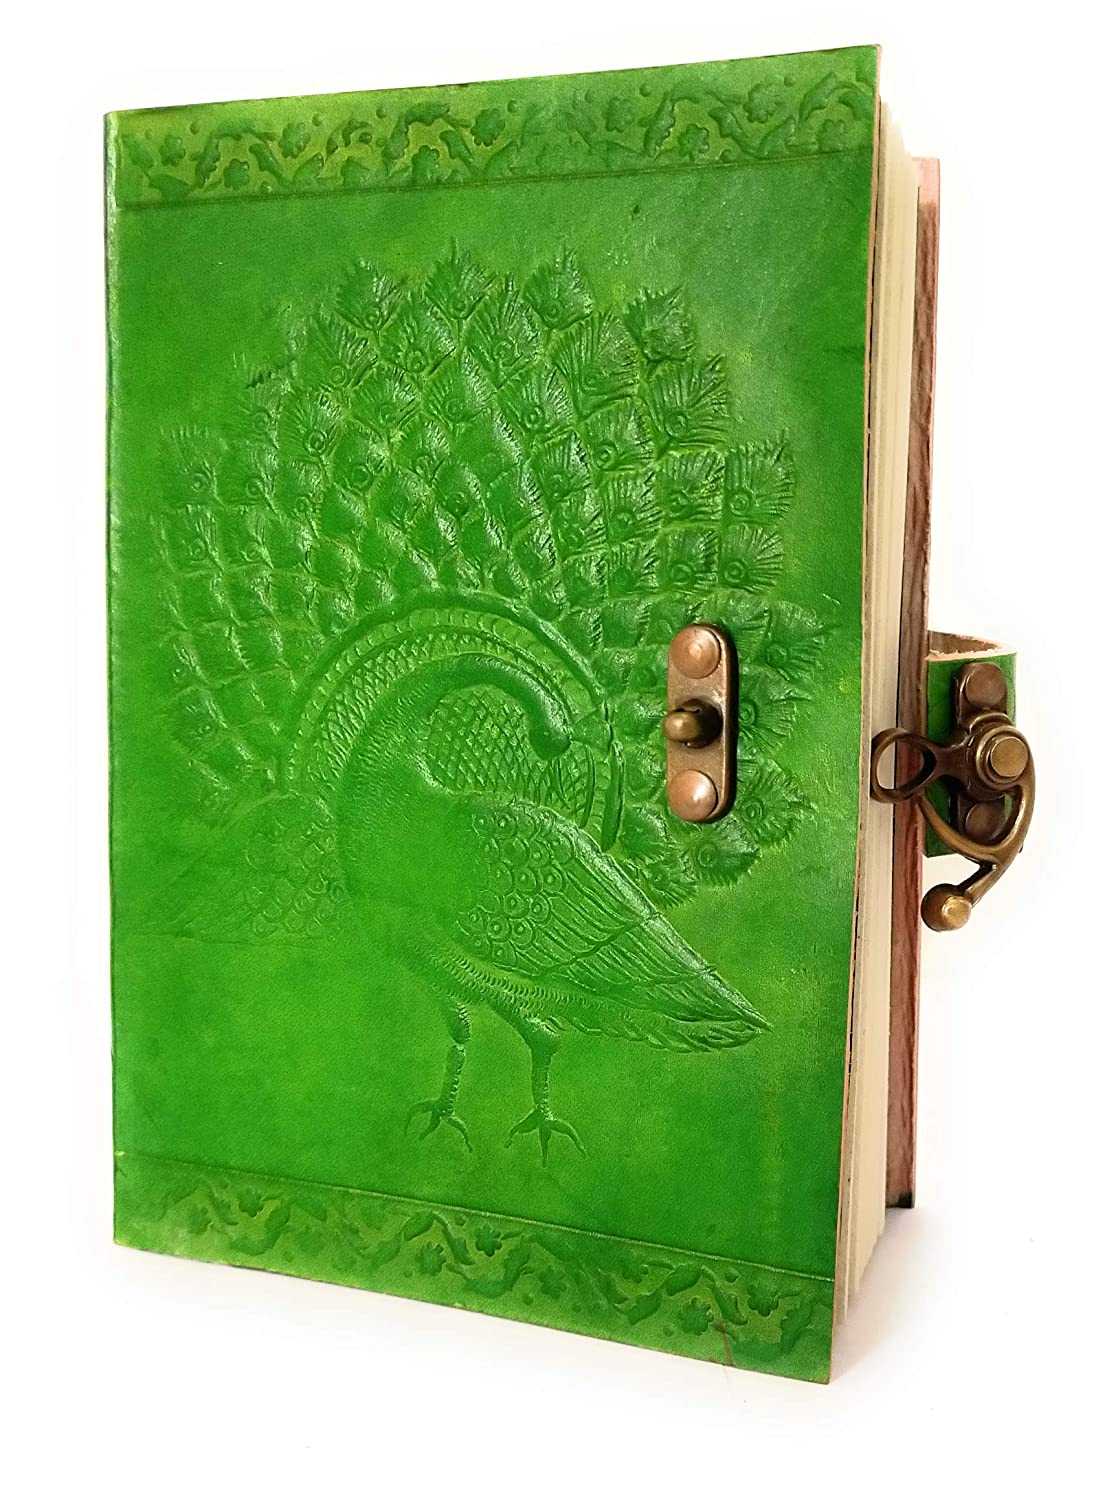 Handmade Leather Diary Notebook - Peacock Design in Green Color Journal with Brass Lock